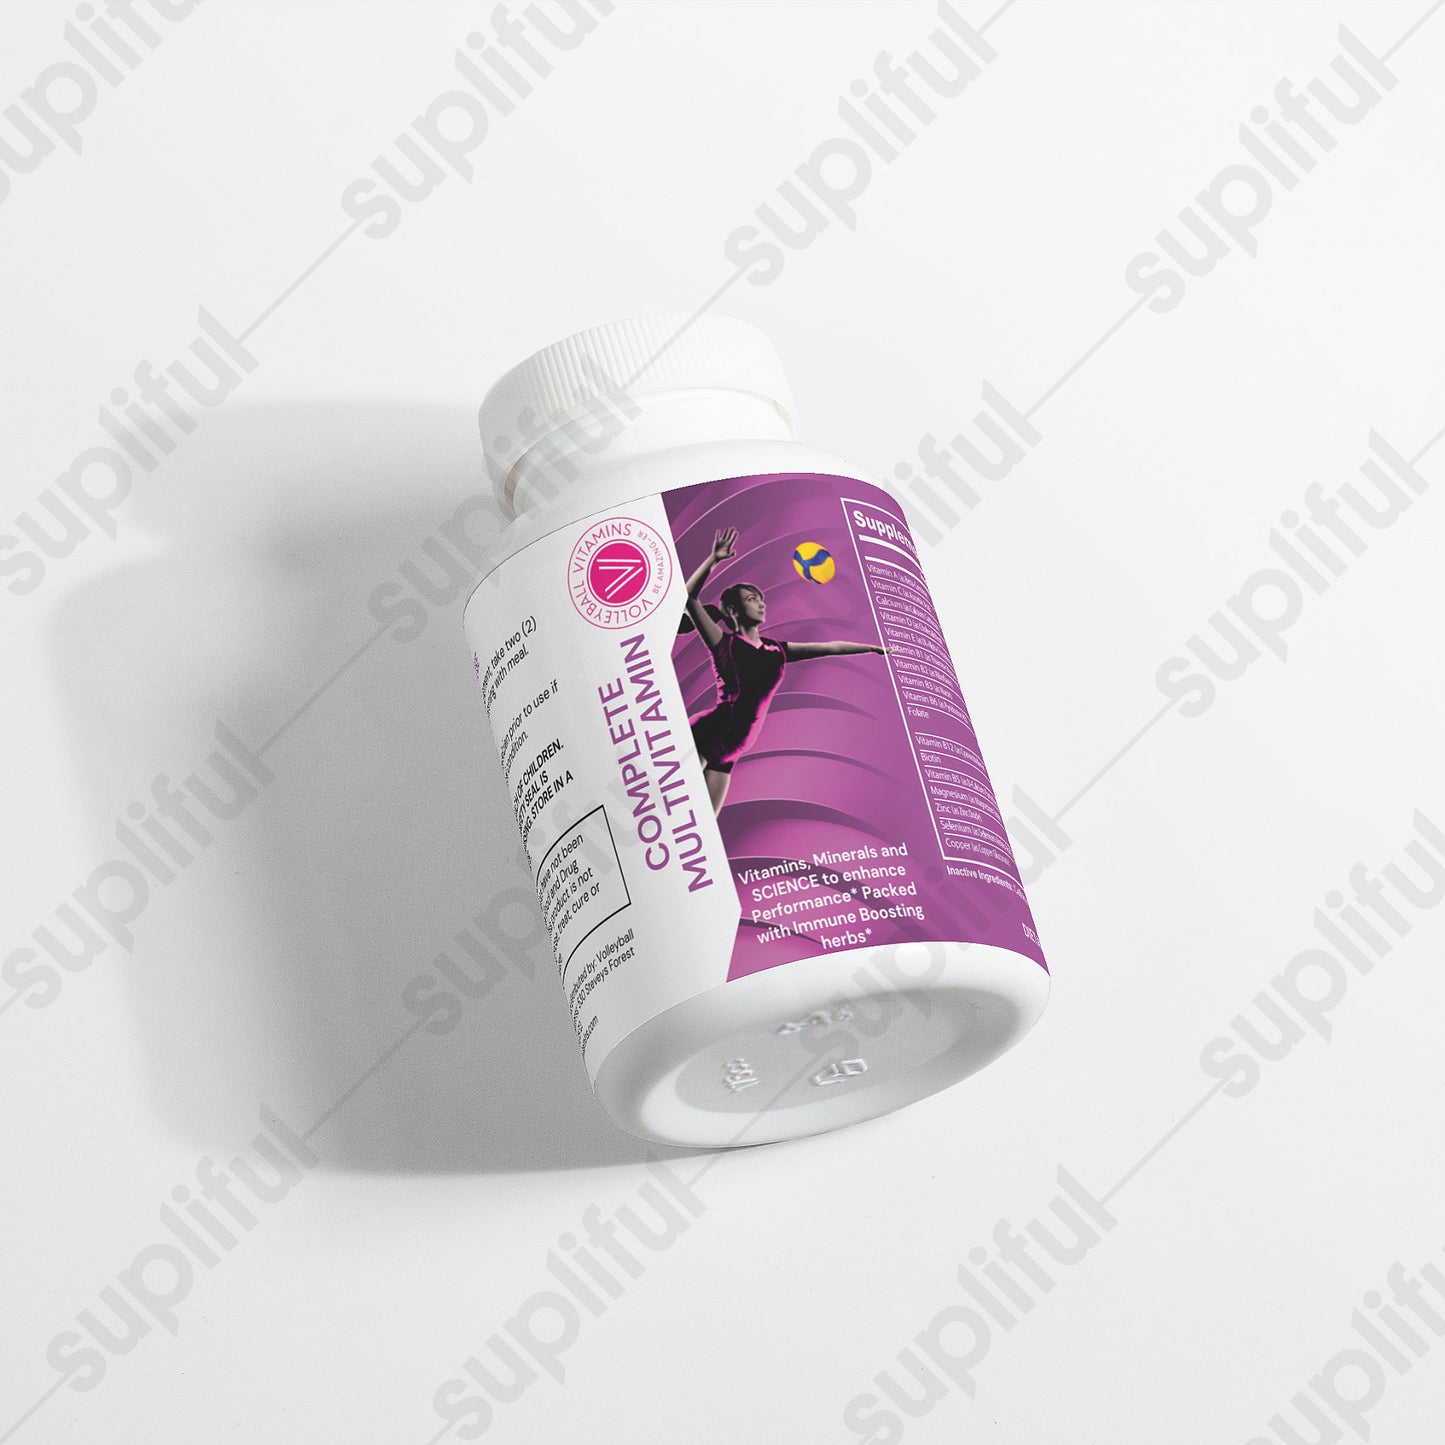 Complete Organic Multivitamin for Young Women